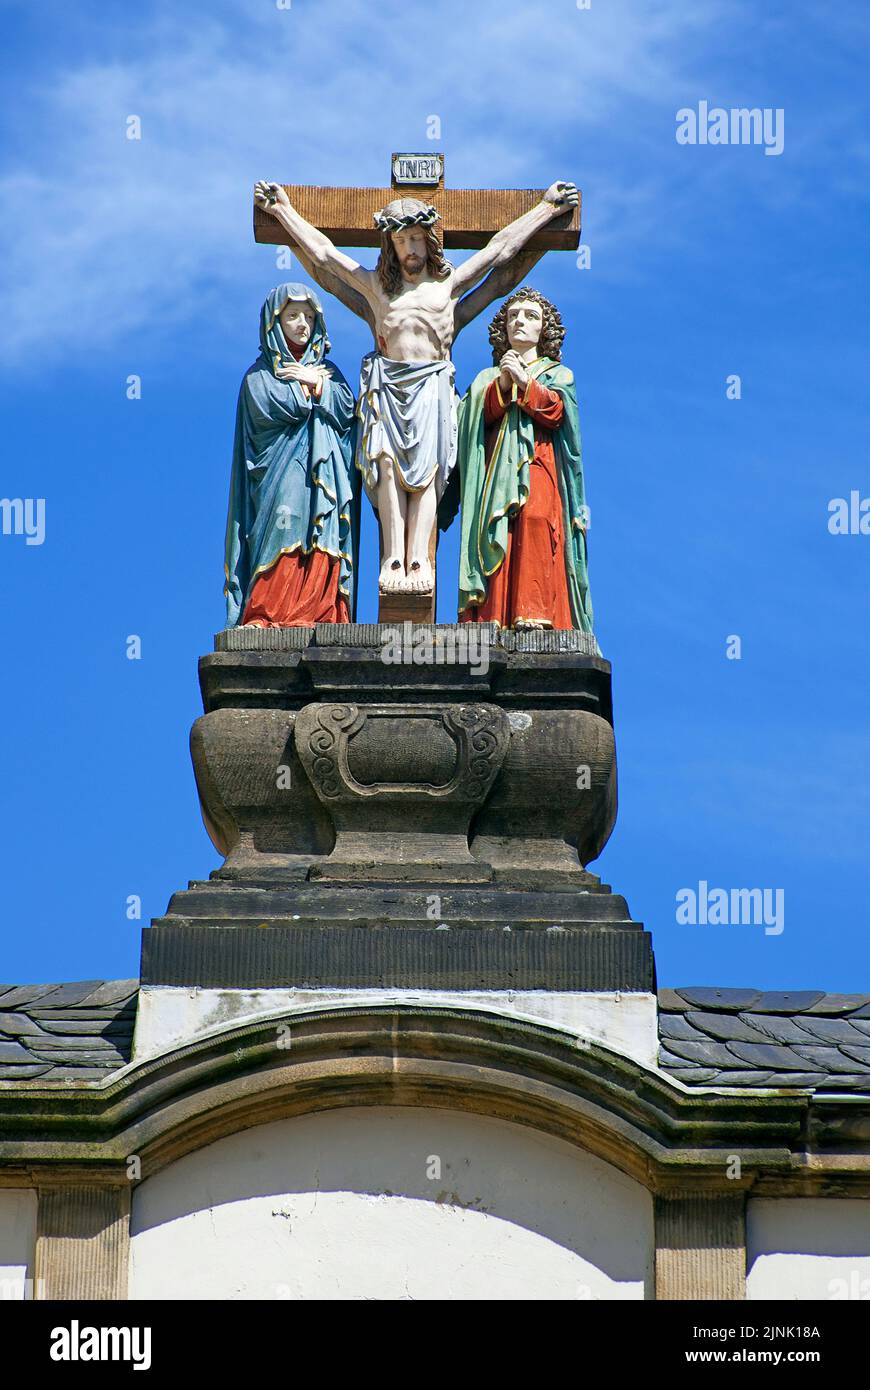 Crucifixion scene on a house arche at the Liebfrauen street, Trier, Rhineland-Palatinate, Germany, Europe Stock Photo